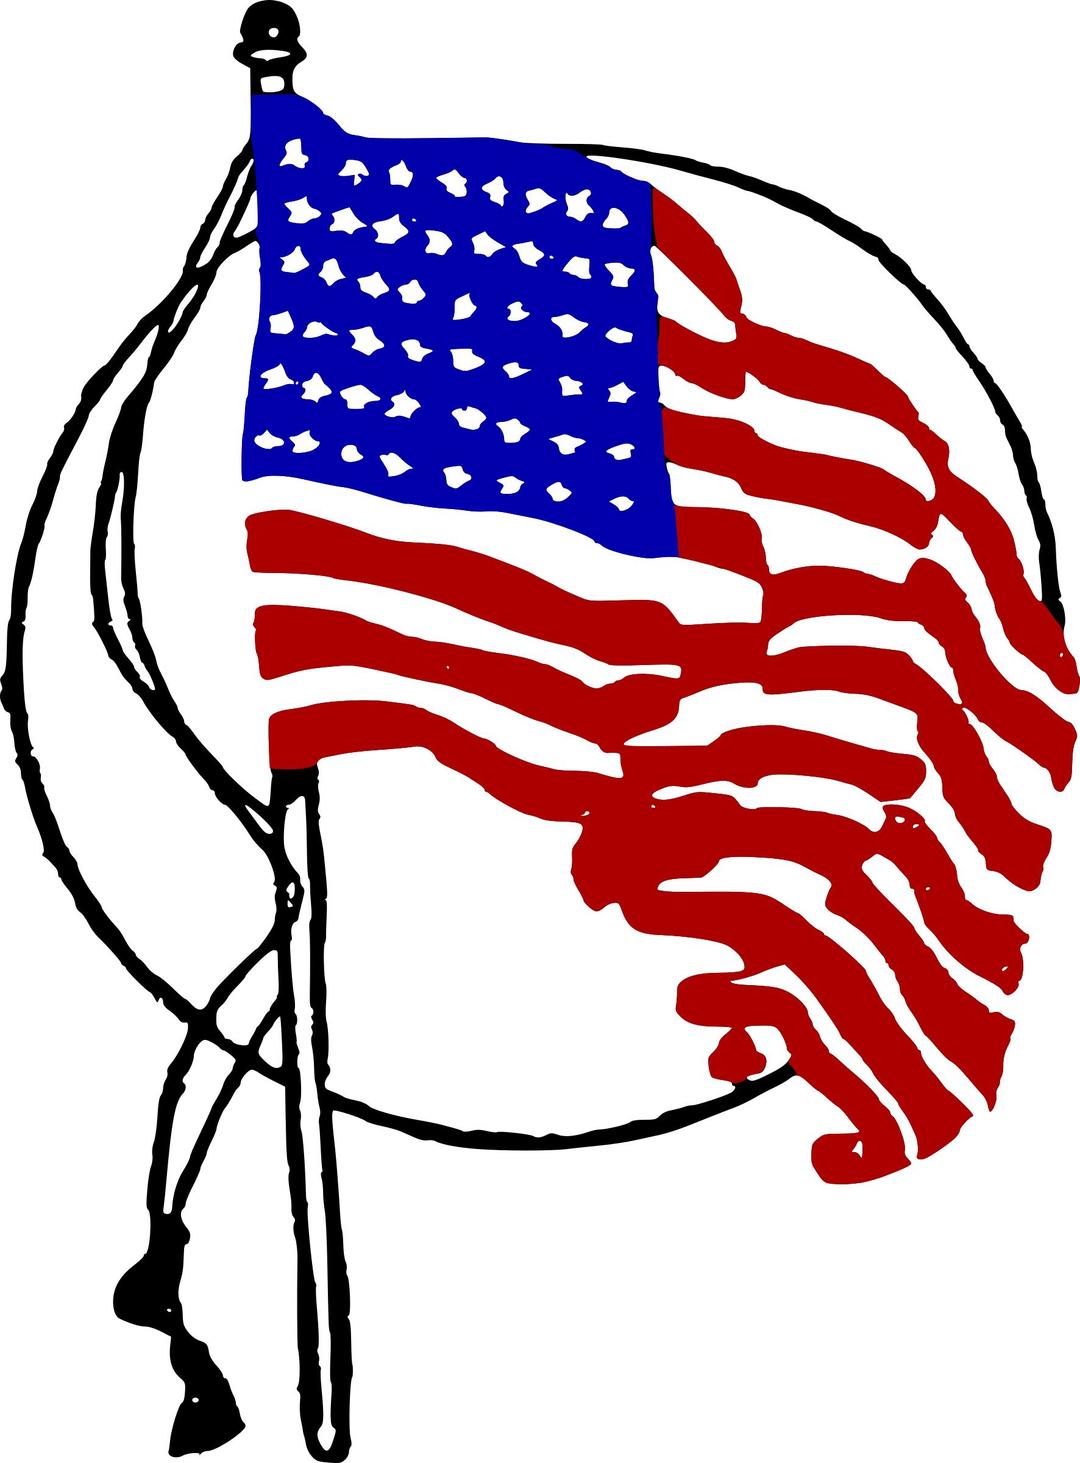 The Old Red White and Blue png transparent